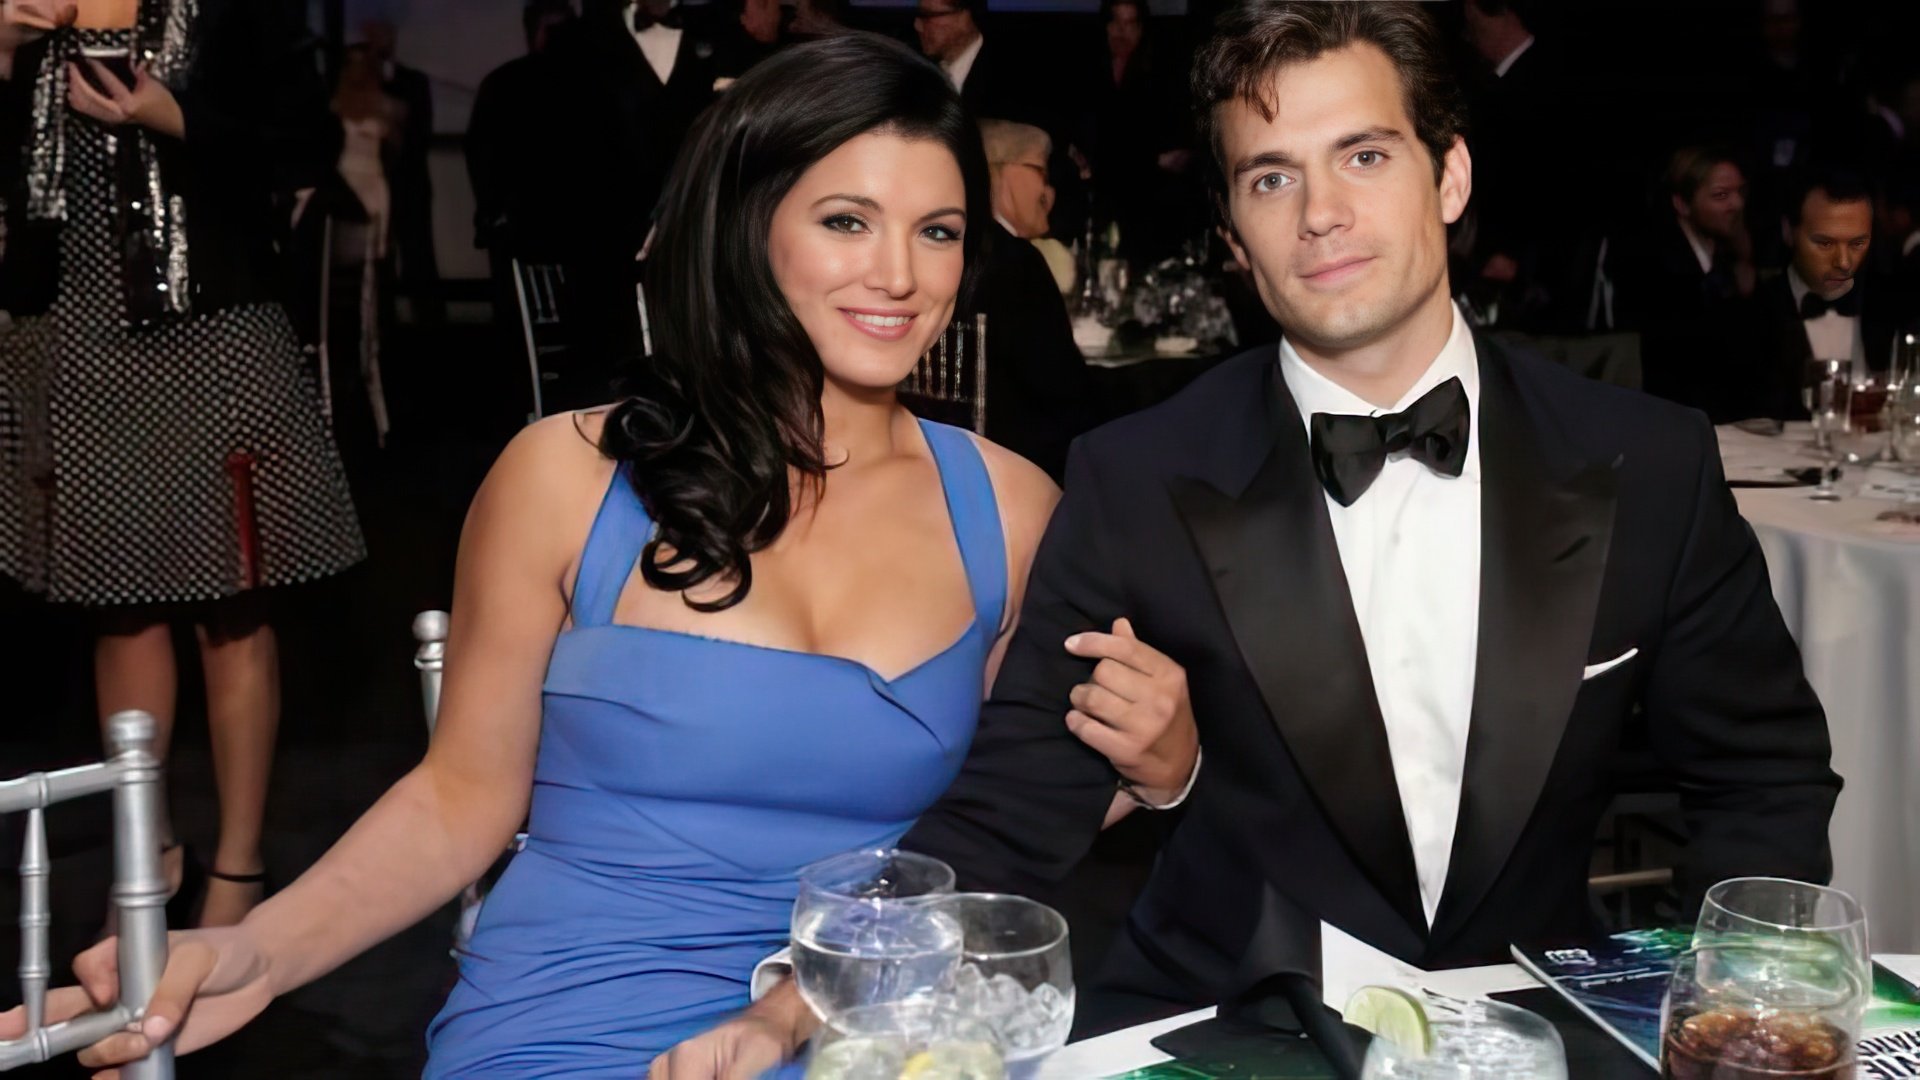 Henry Cavill dated Gina Carano for two years